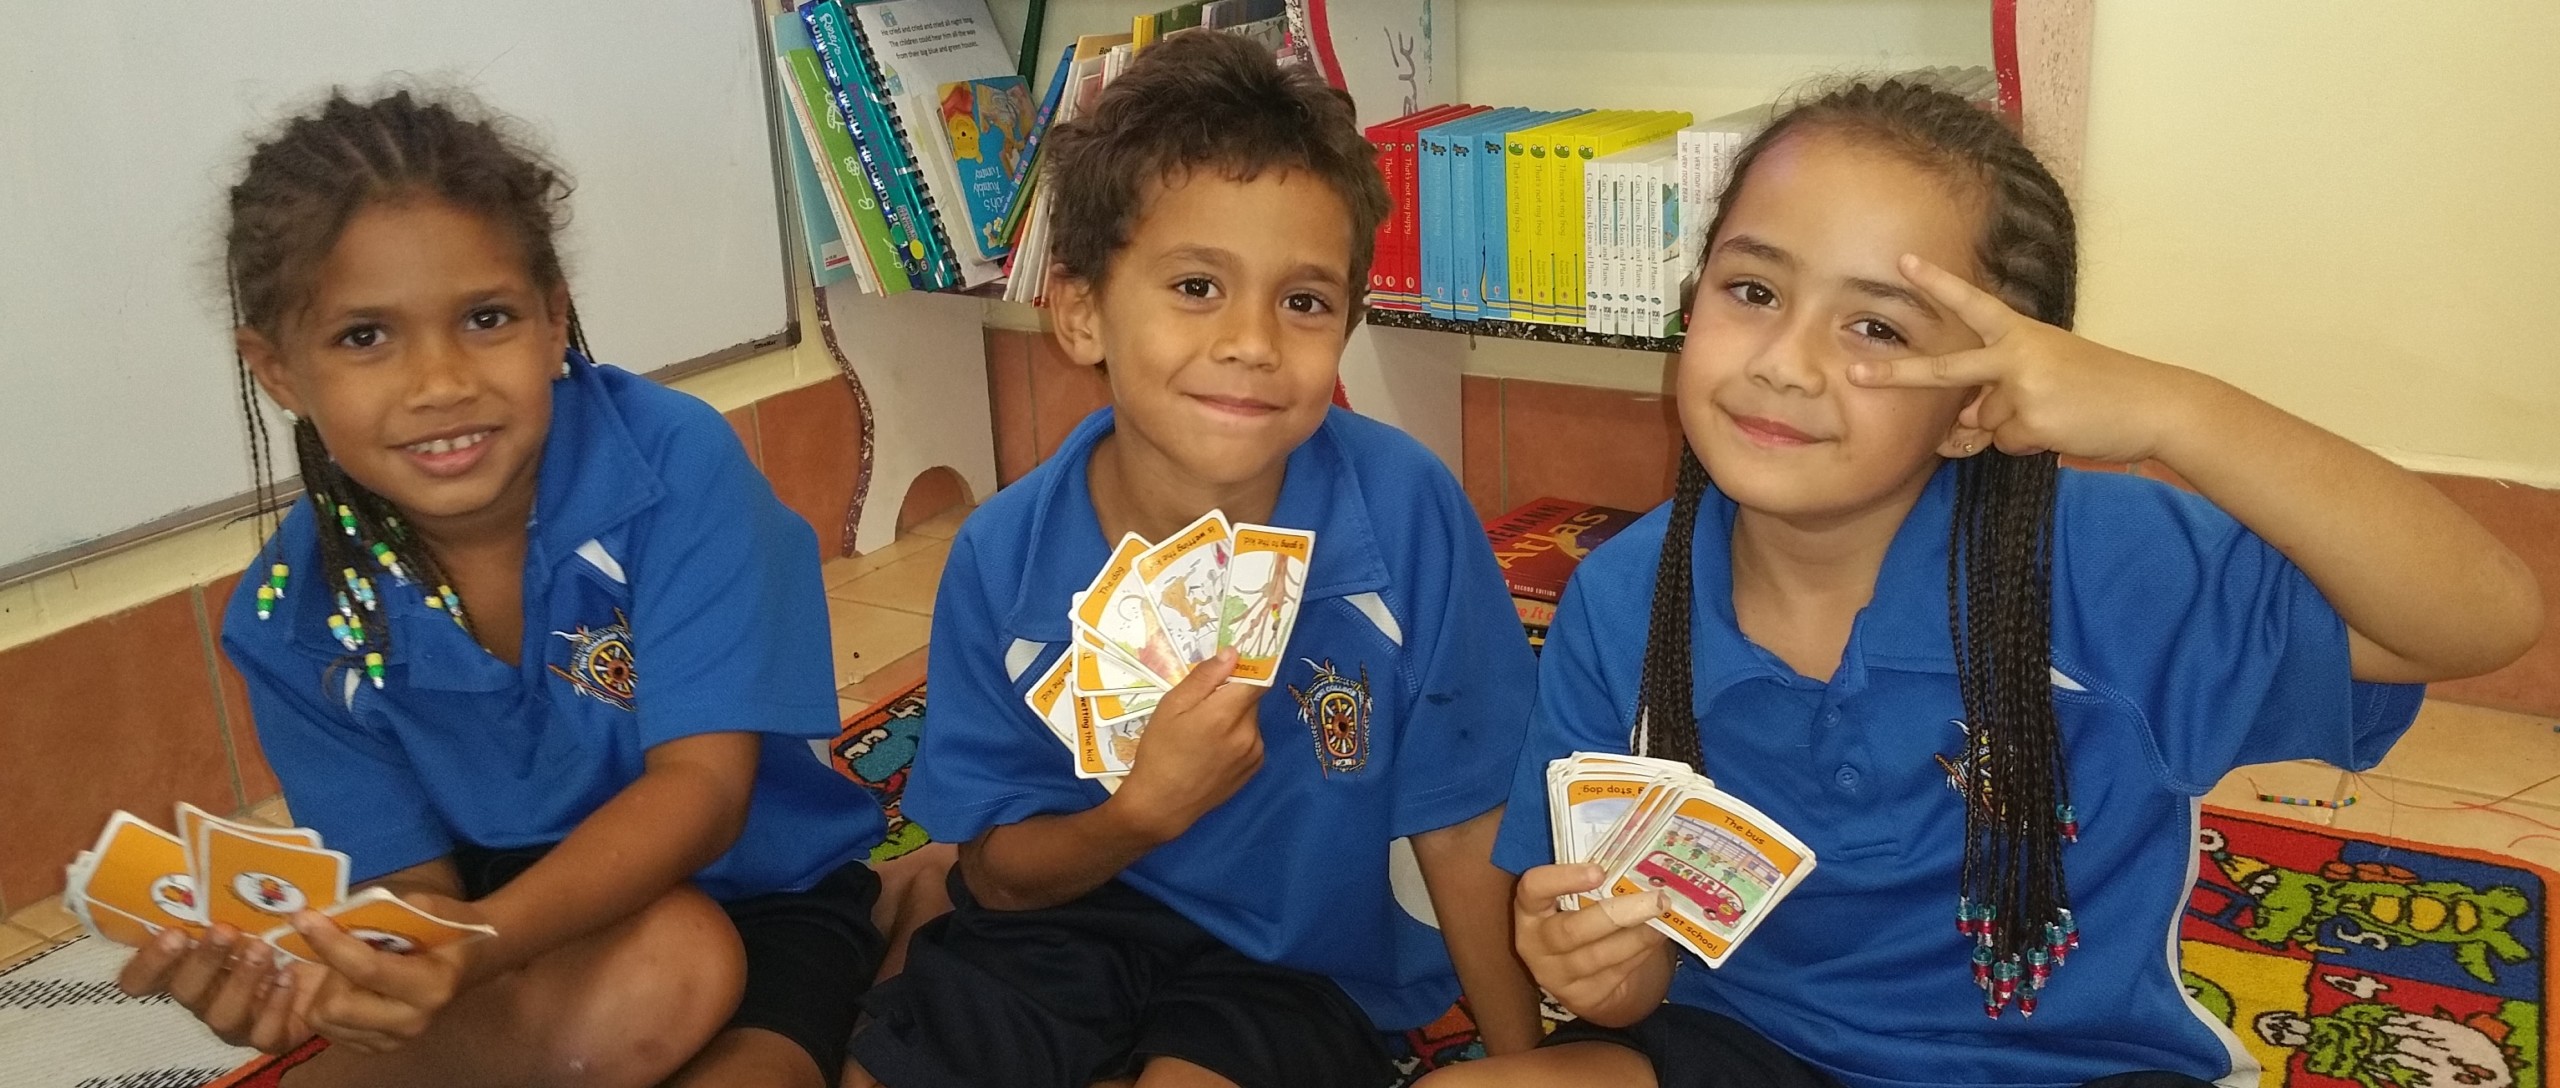 Tiwi College Primary School students enjoying HARs 'Go Dig!' card game.